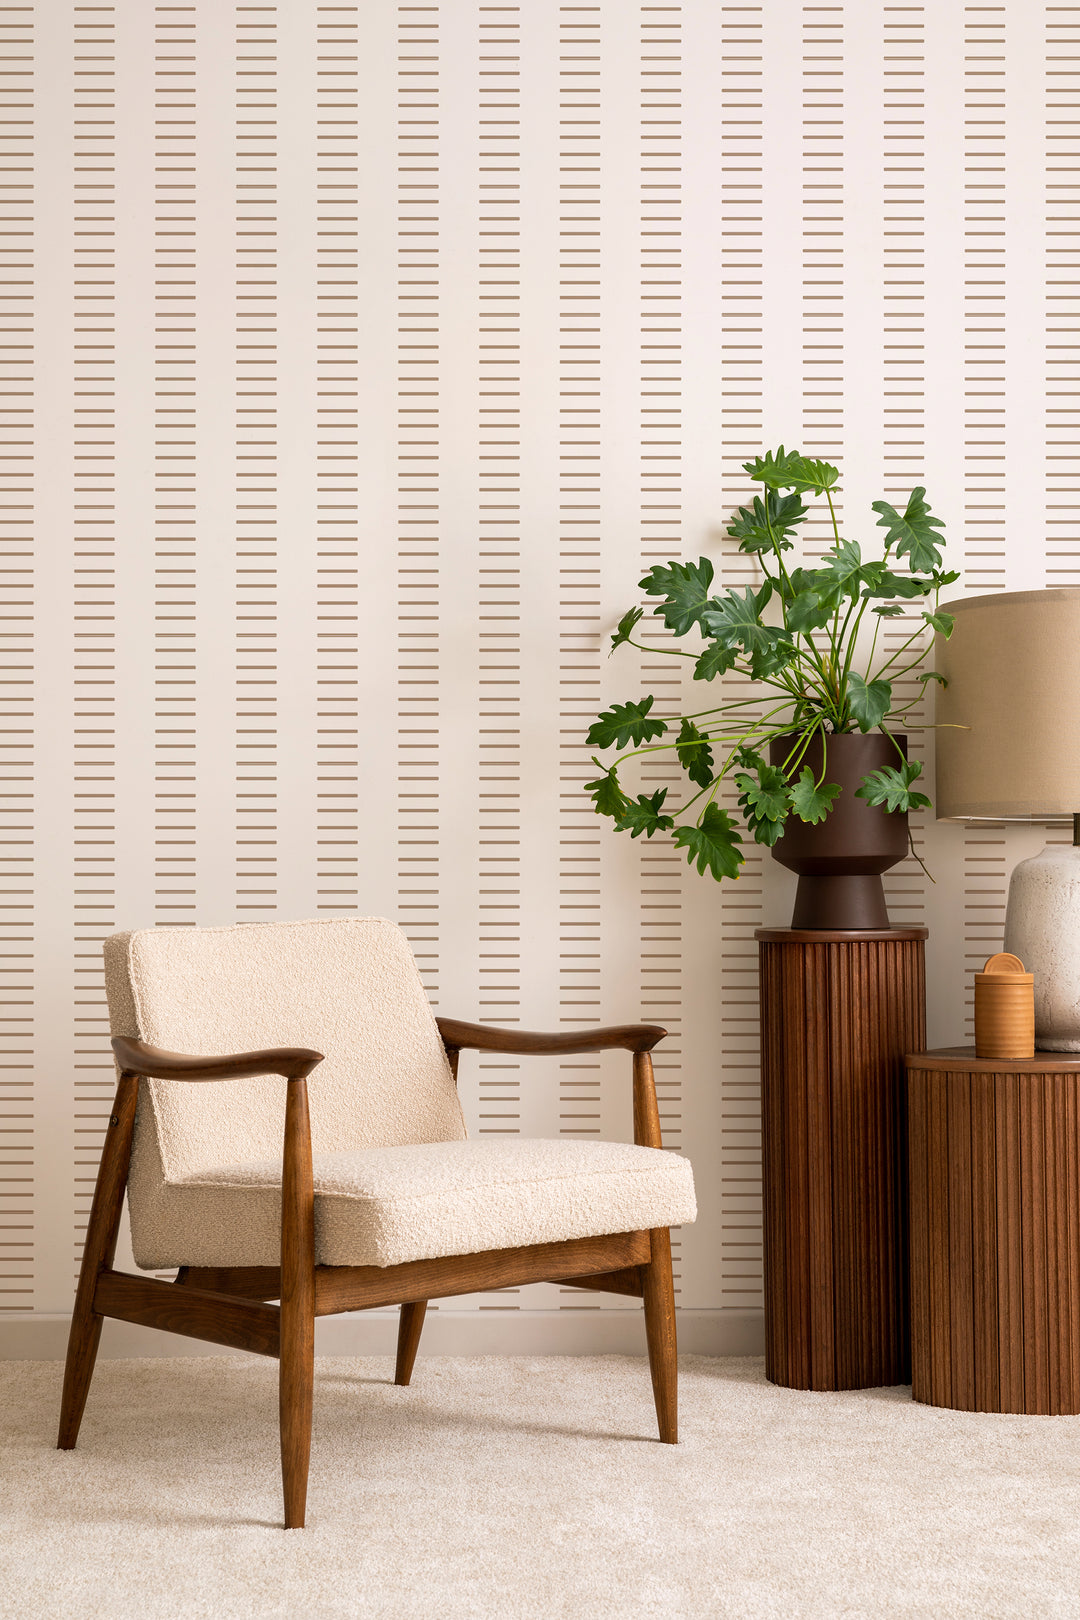 Dashing - Truly Taupe Geometric Wallpaper by Mrs Paranjape Papers